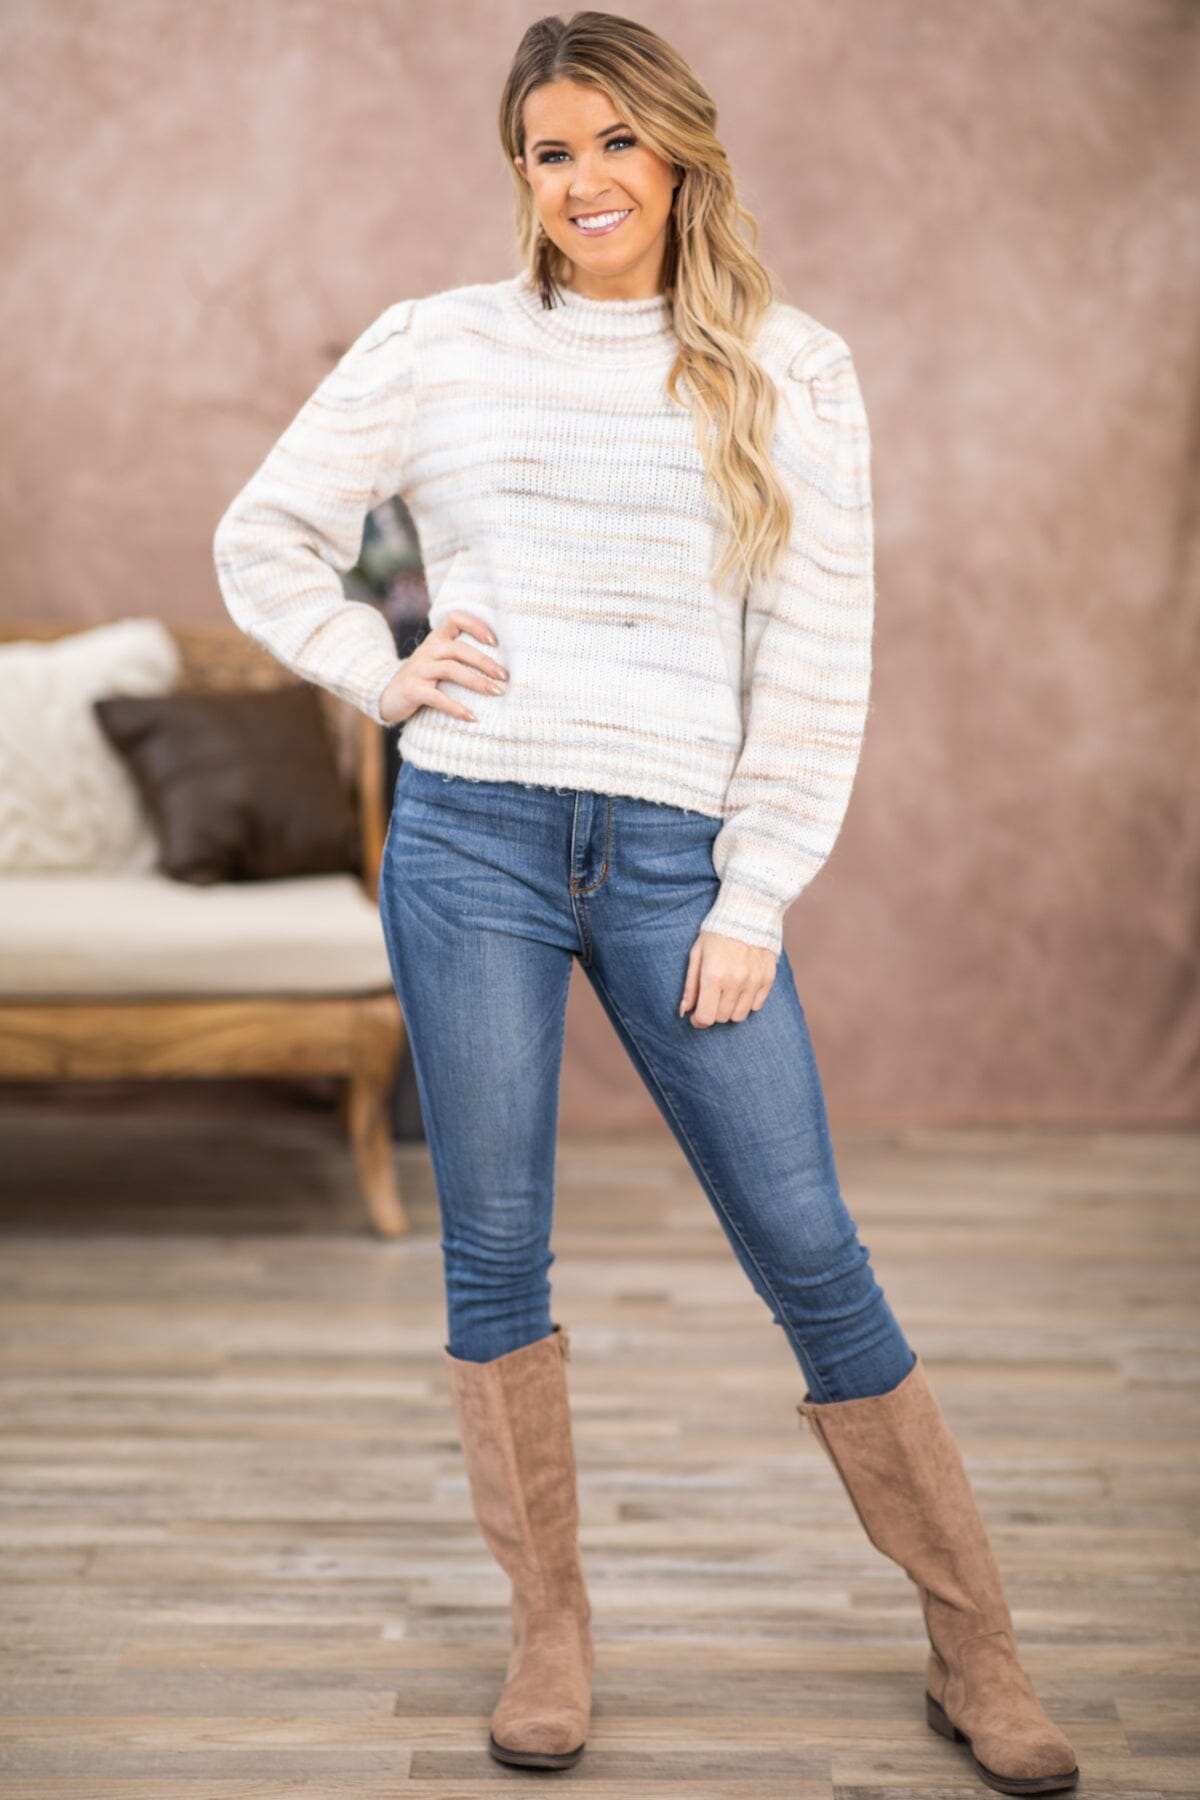 Tan and Grey Melange Mock Neck Sweater - Filly Flair